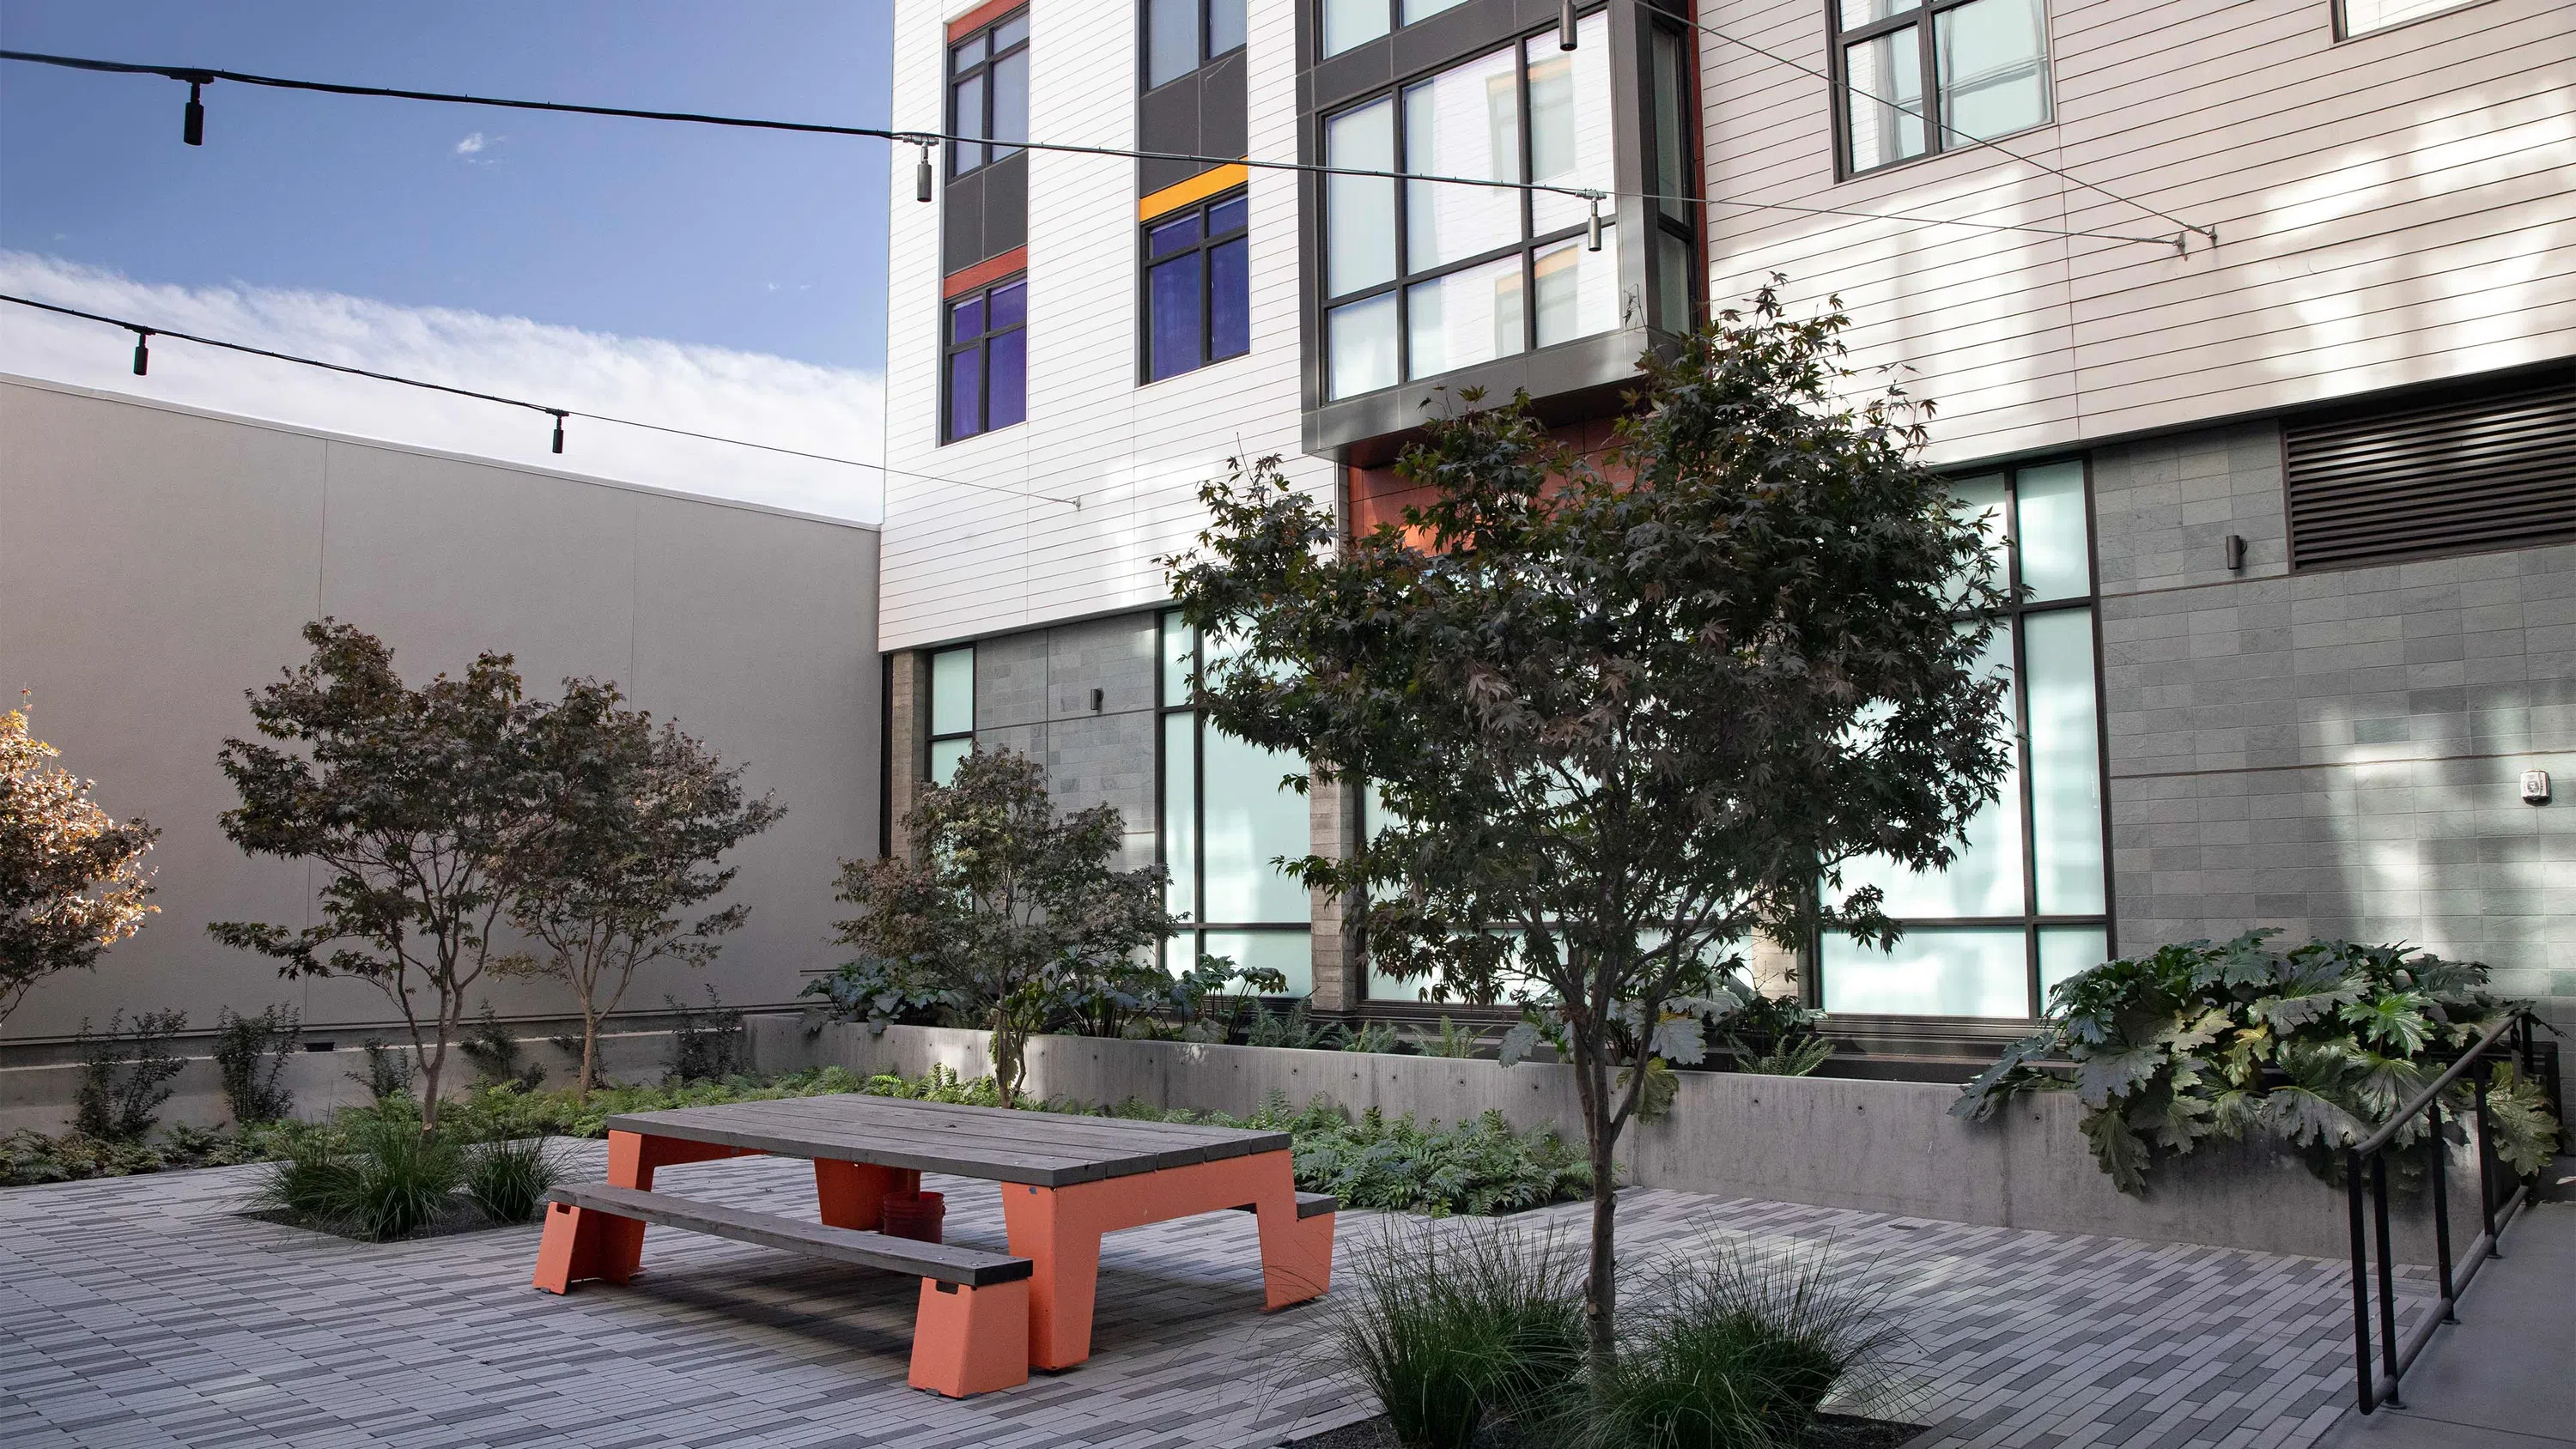 An exterior view of the interior courtyard that includes orange-and-wood tables and benches and greenery.